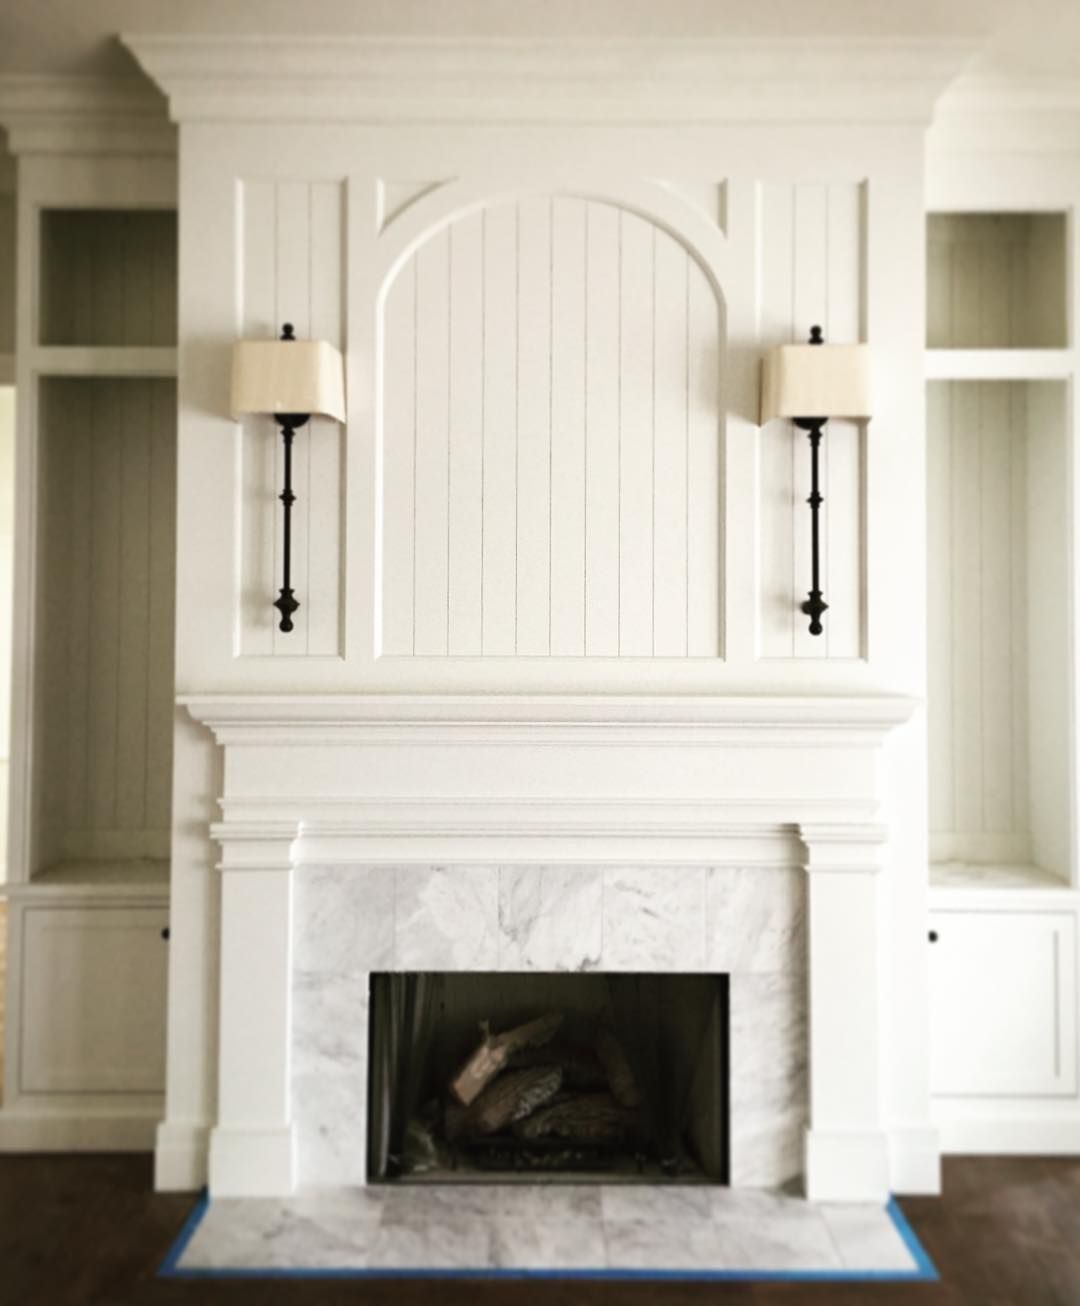 Love the arch and sconces. Would do brick instead of marble surround